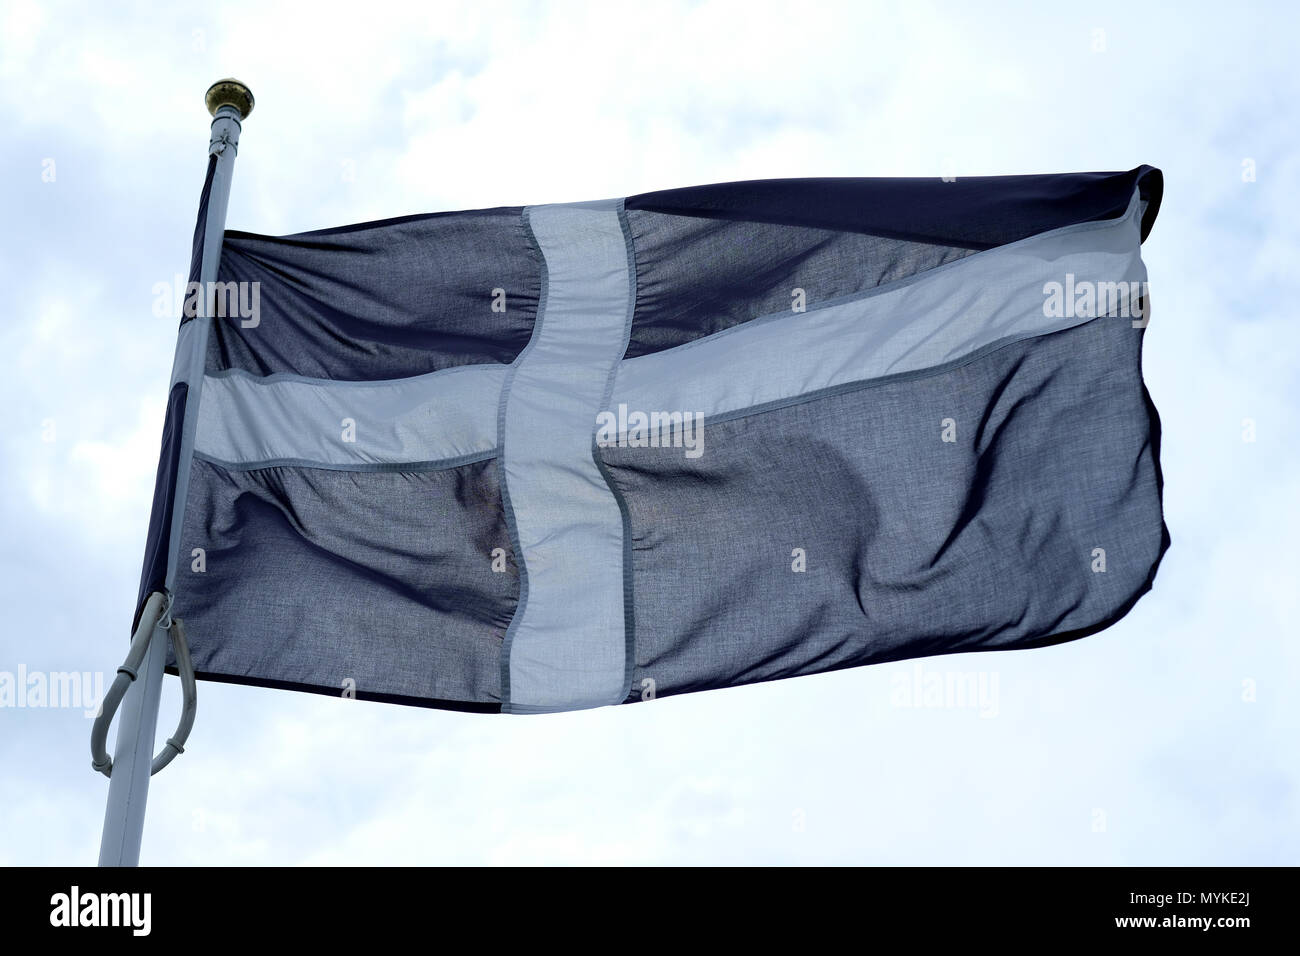 The flag of Cornwall, St Piran's. Stock Photo